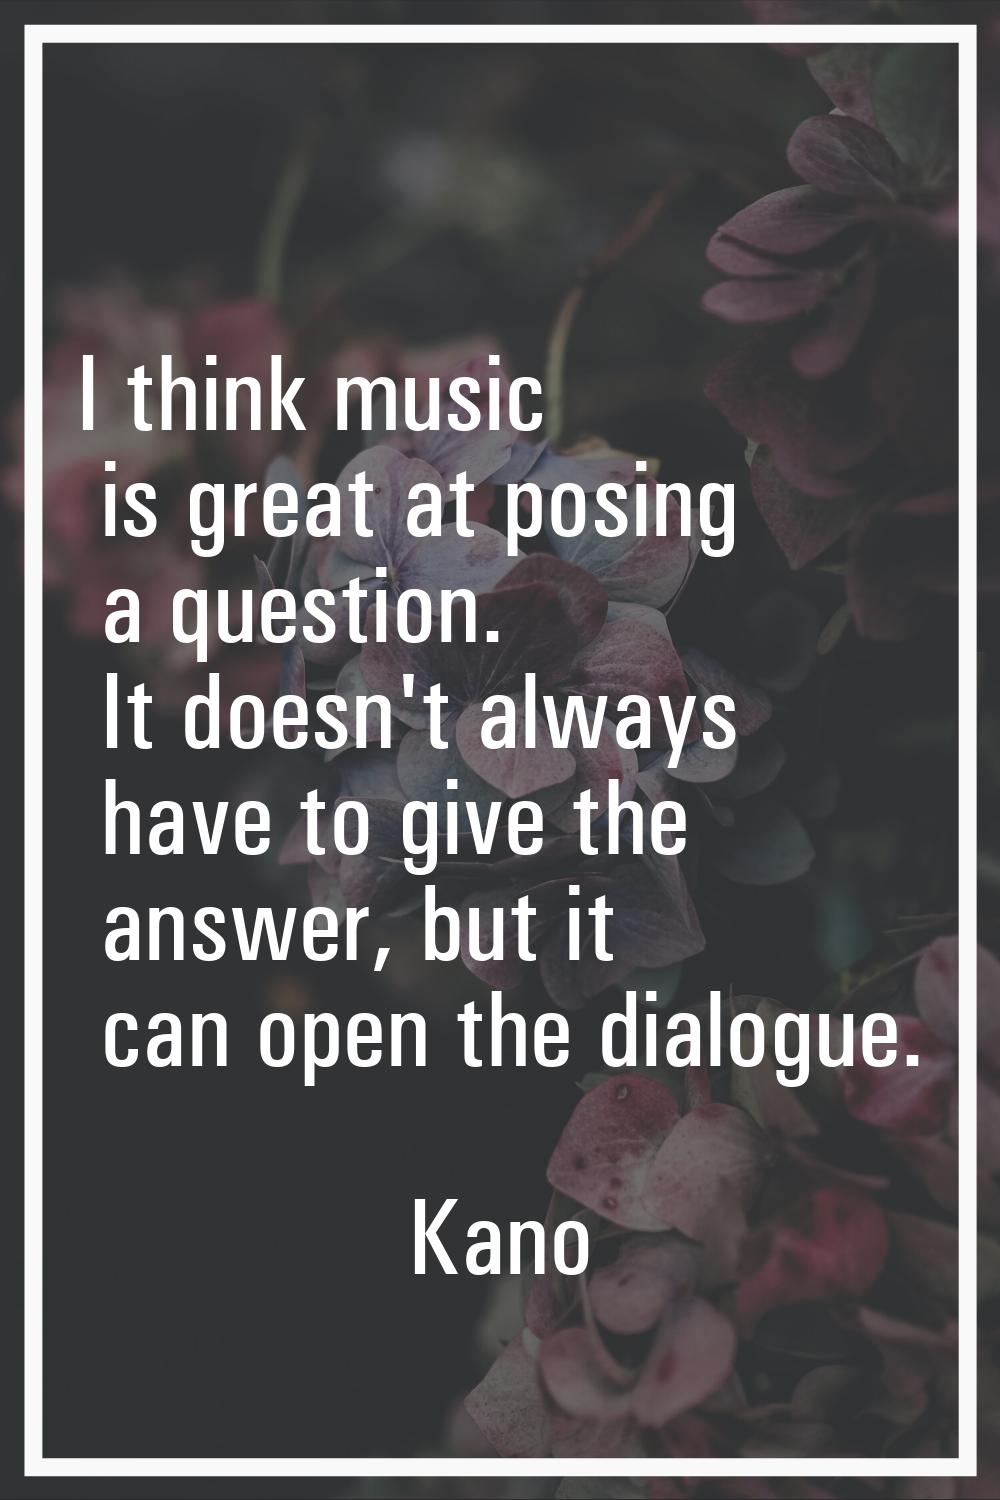 I think music is great at posing a question. It doesn't always have to give the answer, but it can 